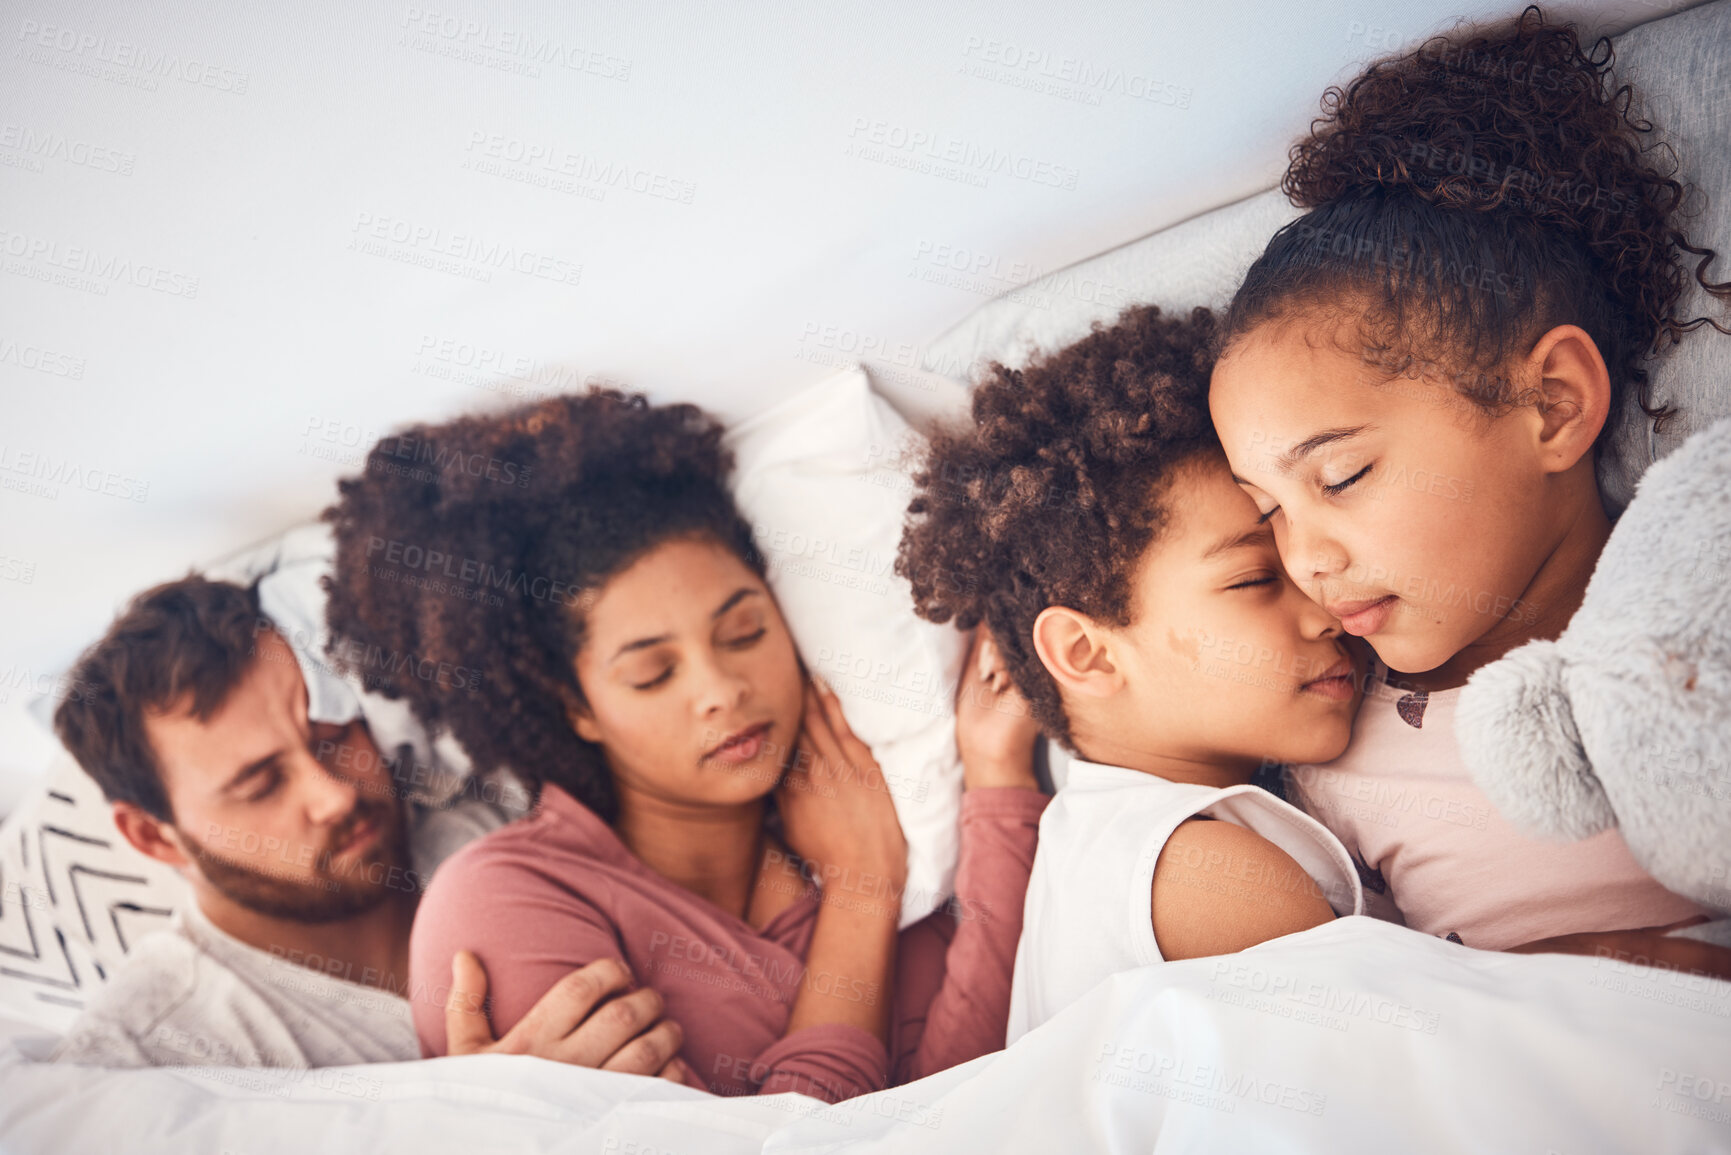 Buy stock photo Comfort, sleeping and family in a bed with love, dreaming and resting in their home together. Sleep, nap and children with parents in a bedroom embracing, peaceful and hugging, comfortable and bond